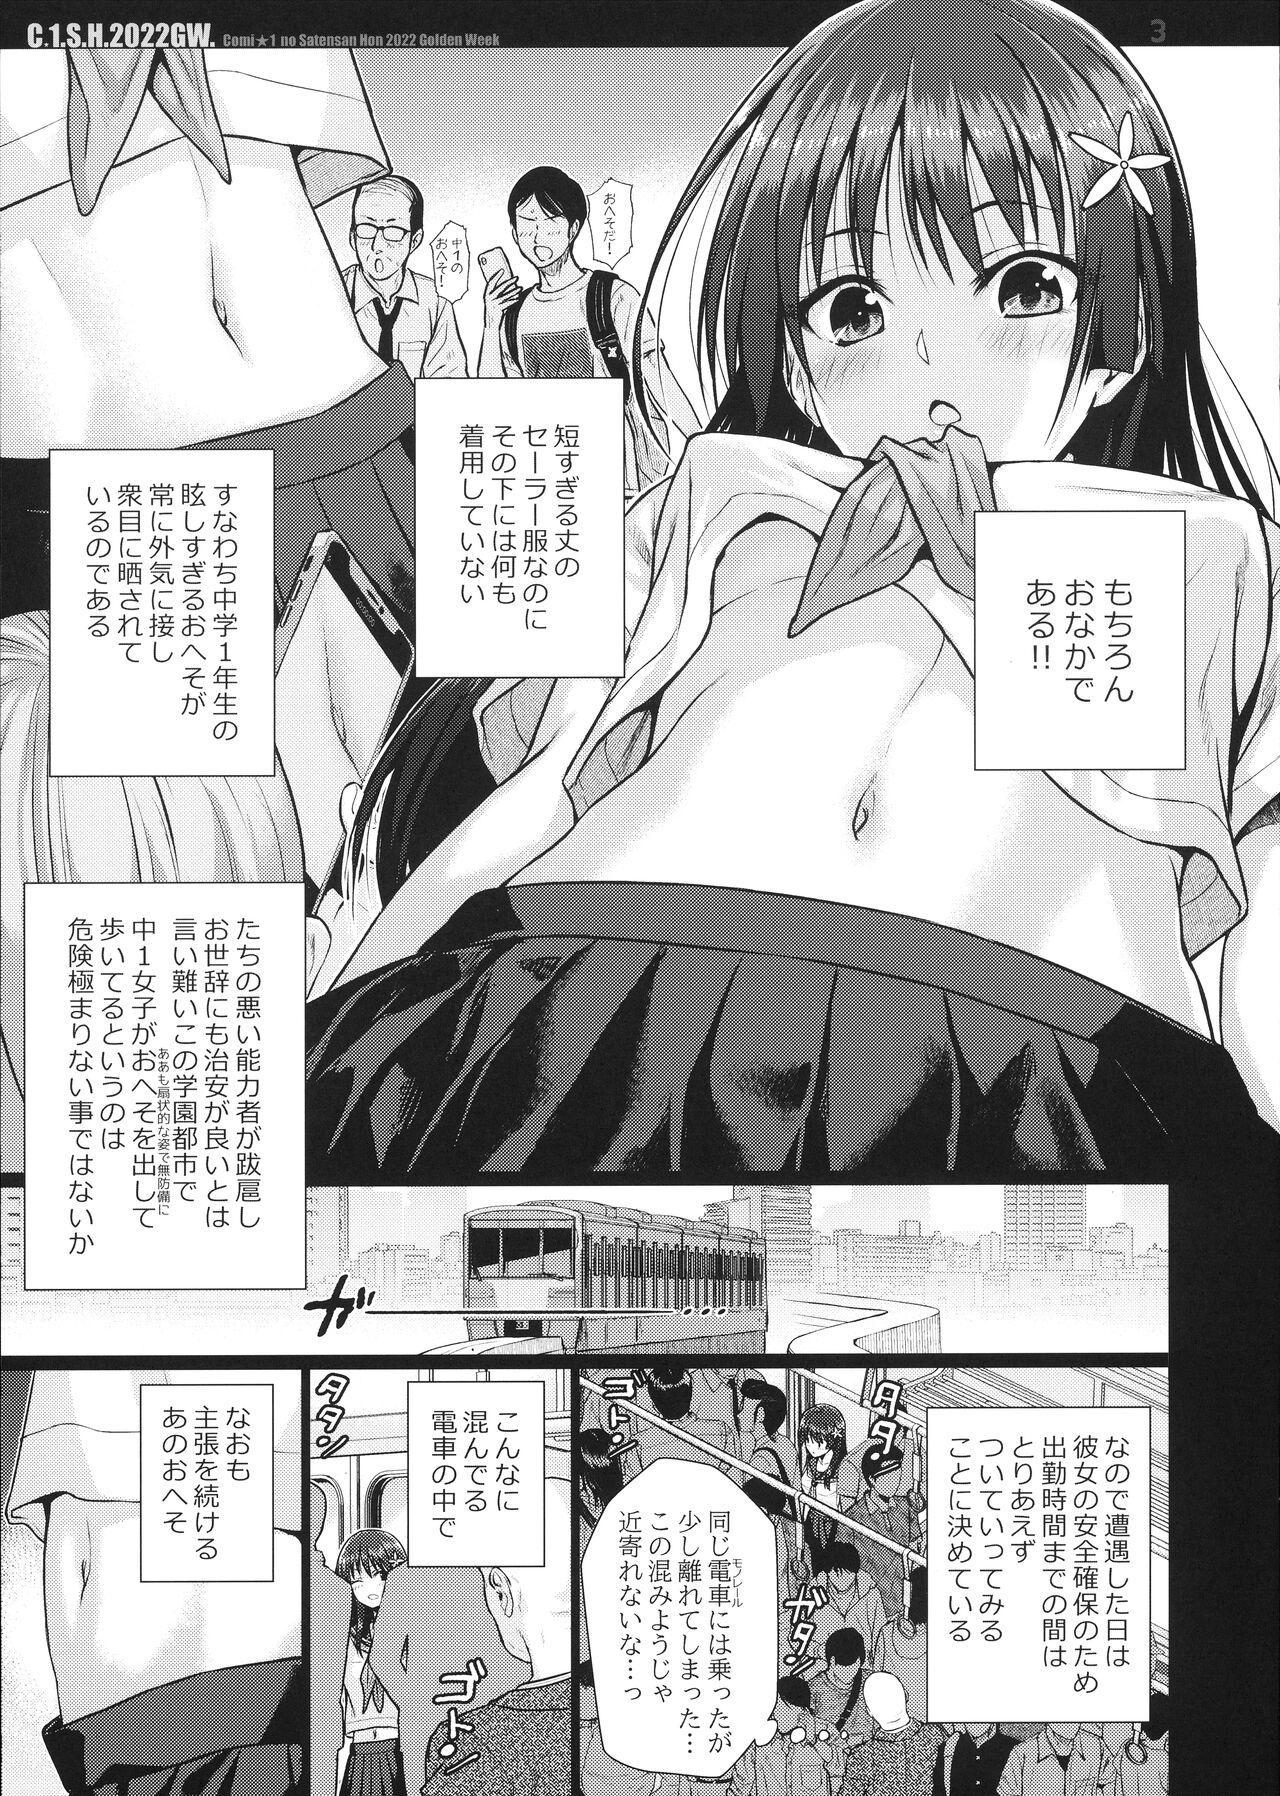 Fit C☆1.S.H.2022GW. - Toaru project Anal - Page 3